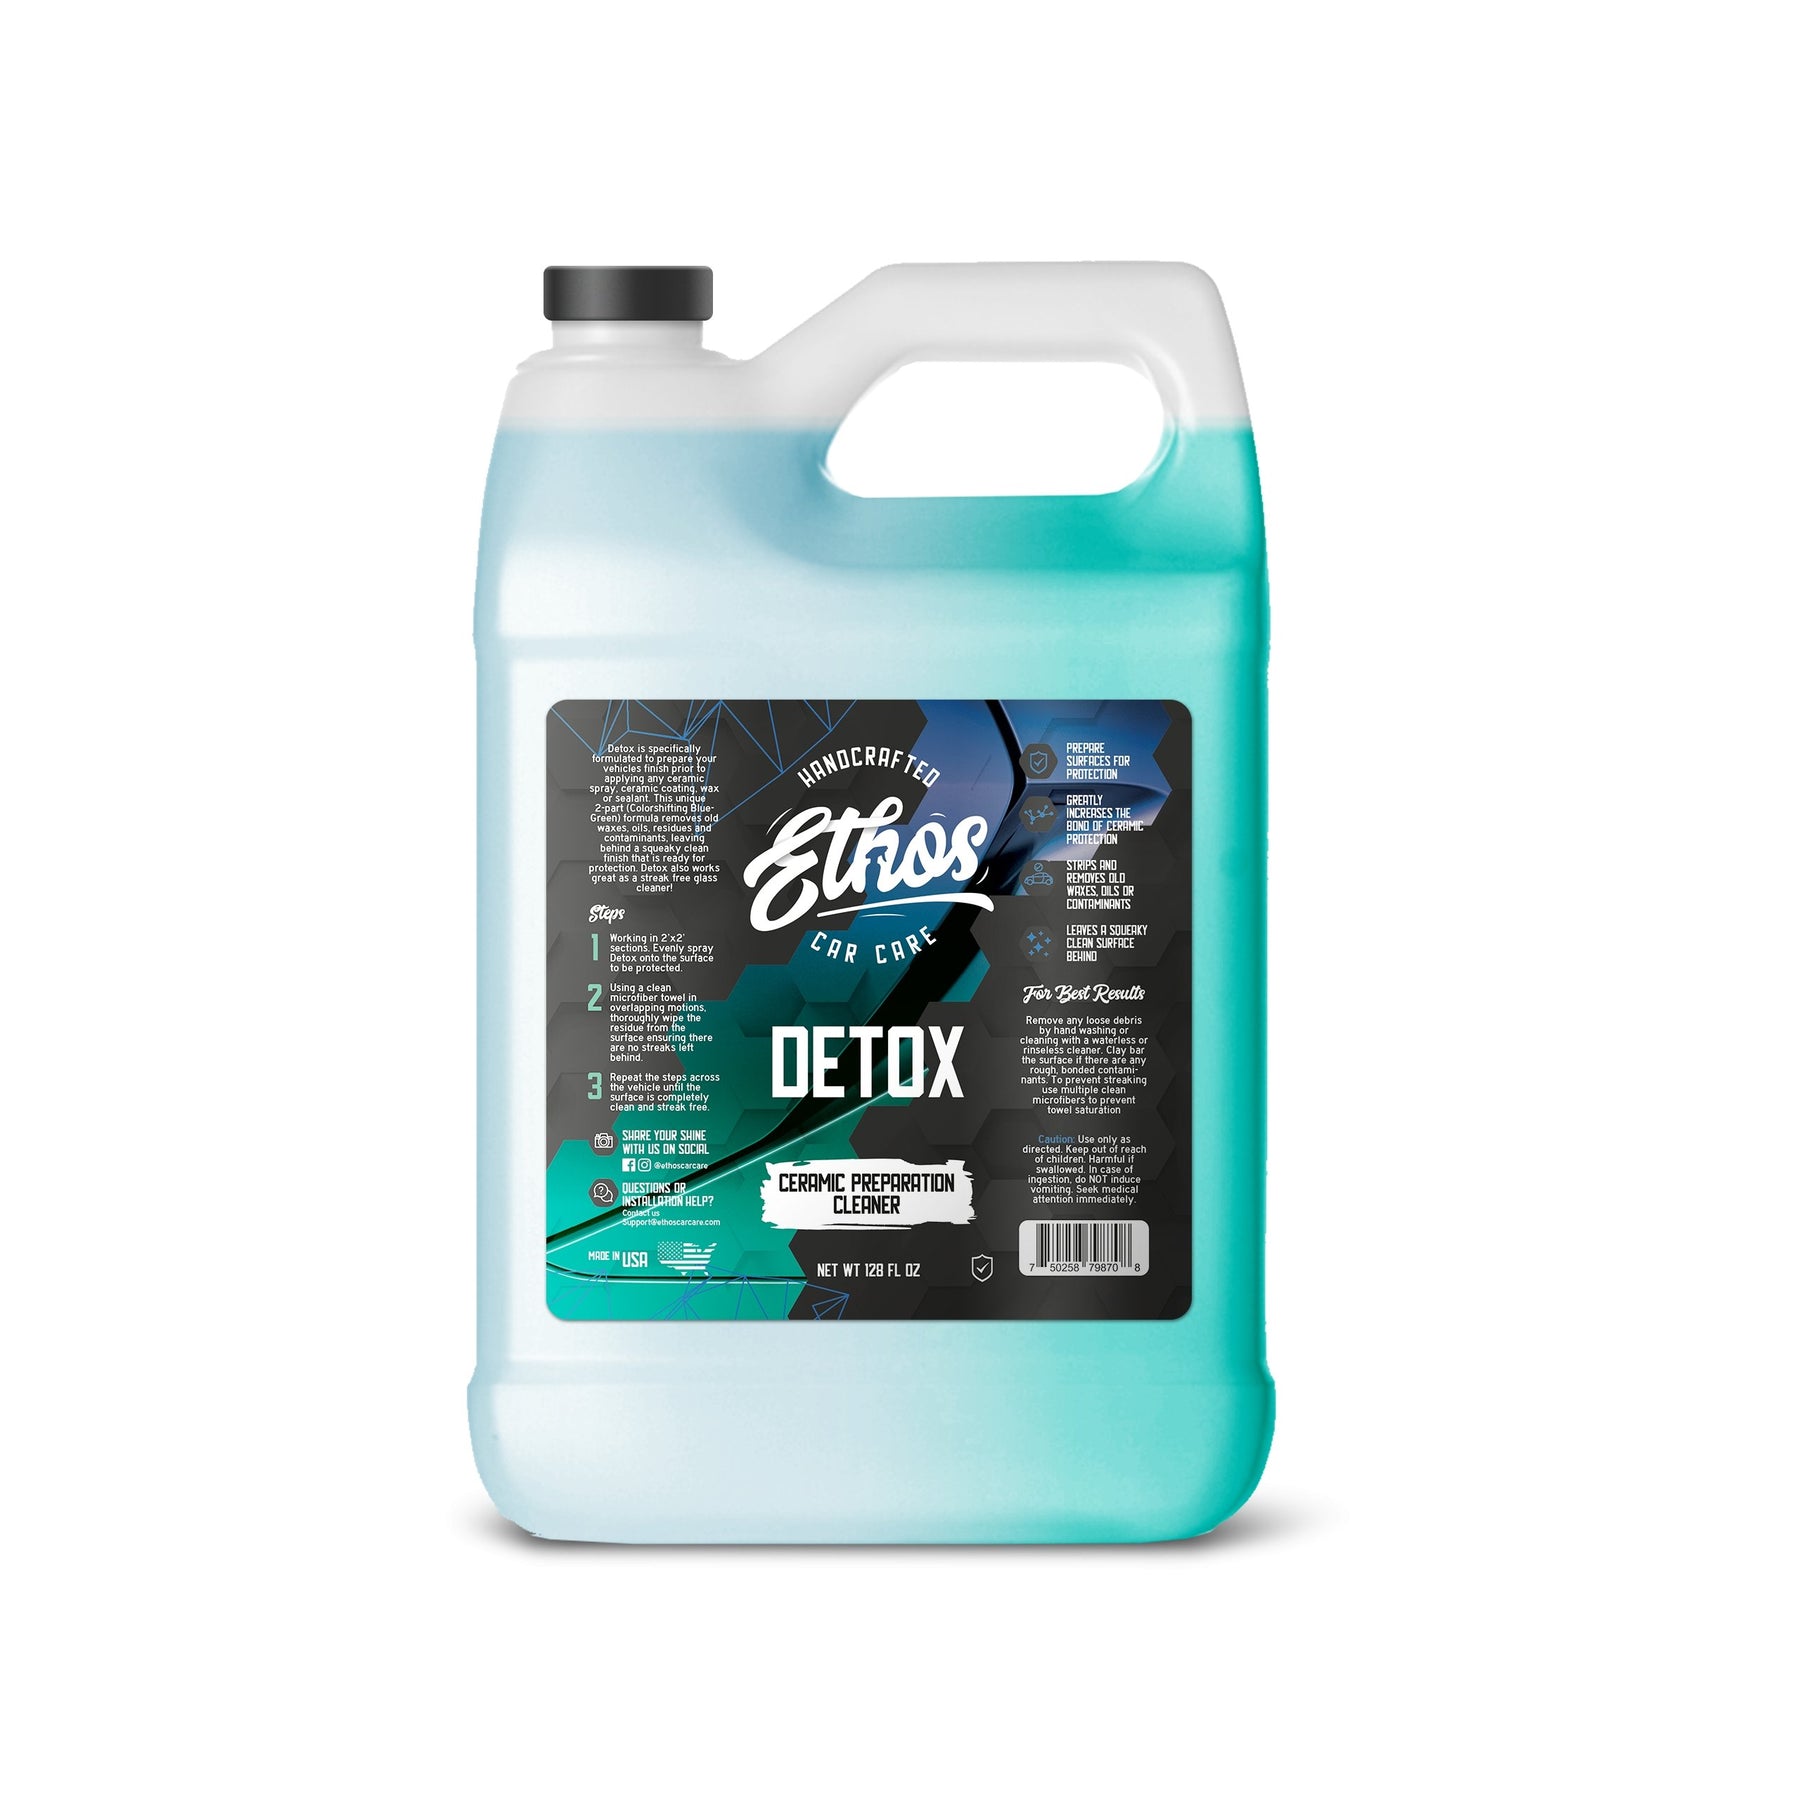 SHINY GARAGE PERFECT GLASS CLEANER 5L